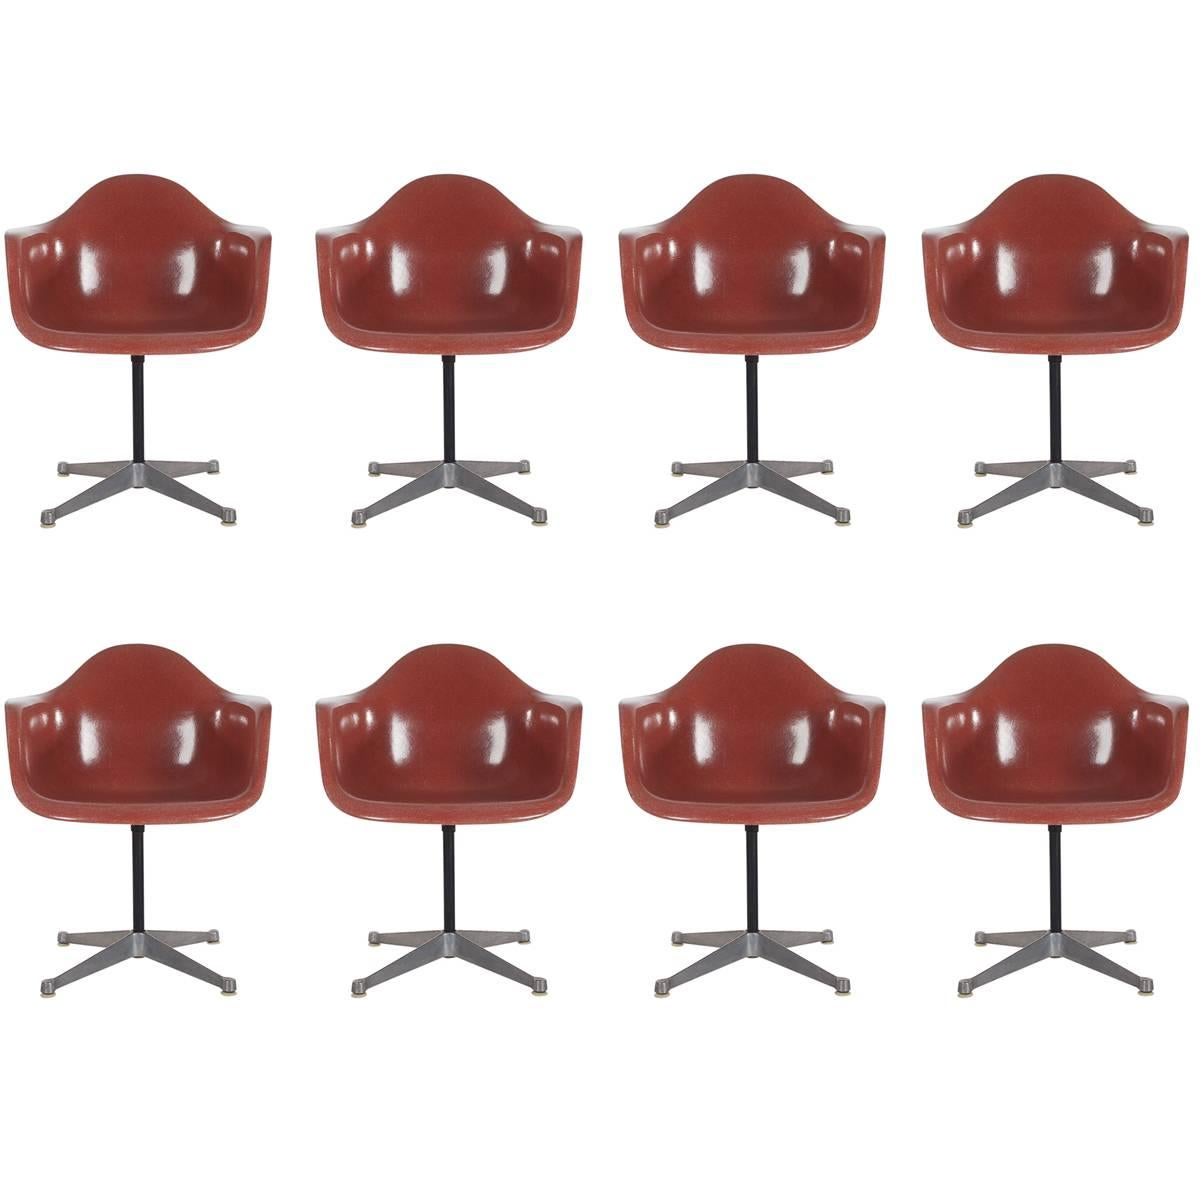 Mid-Century Charles Eames Herman Miller Fiberglass Dining Chairs in Terracotta